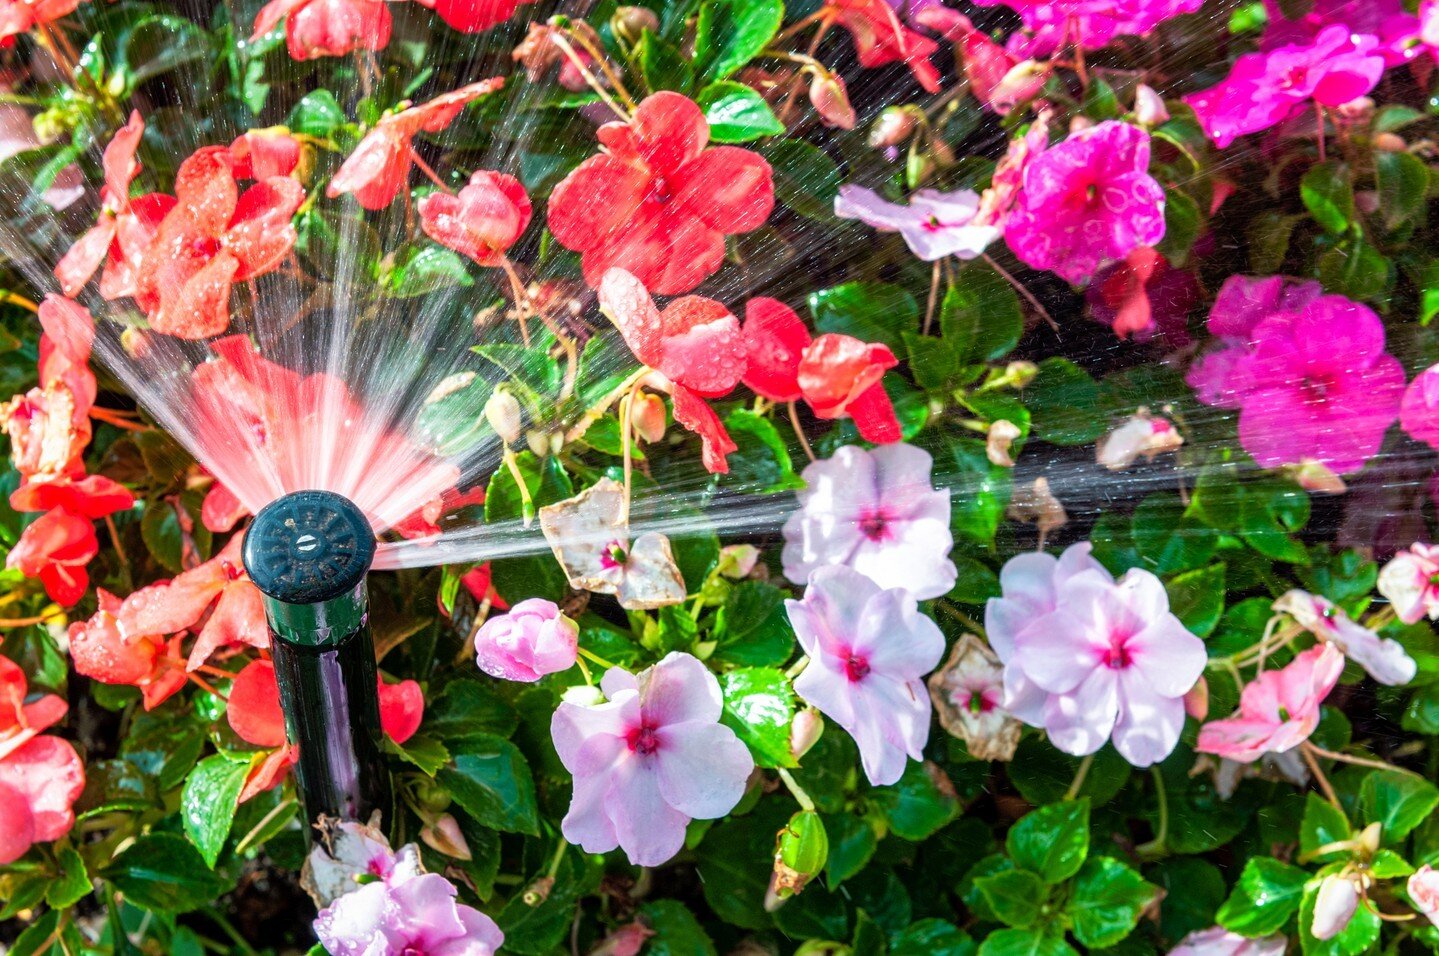 It is officially SPRINGTIME! ☀️🌱

Embrace the beauty of the season and ensure your landscape thrives with our expert irrigation services! 💦

Schedule your irrigation maintenance 🔧check today and let us fine-tune your system for optimal performance